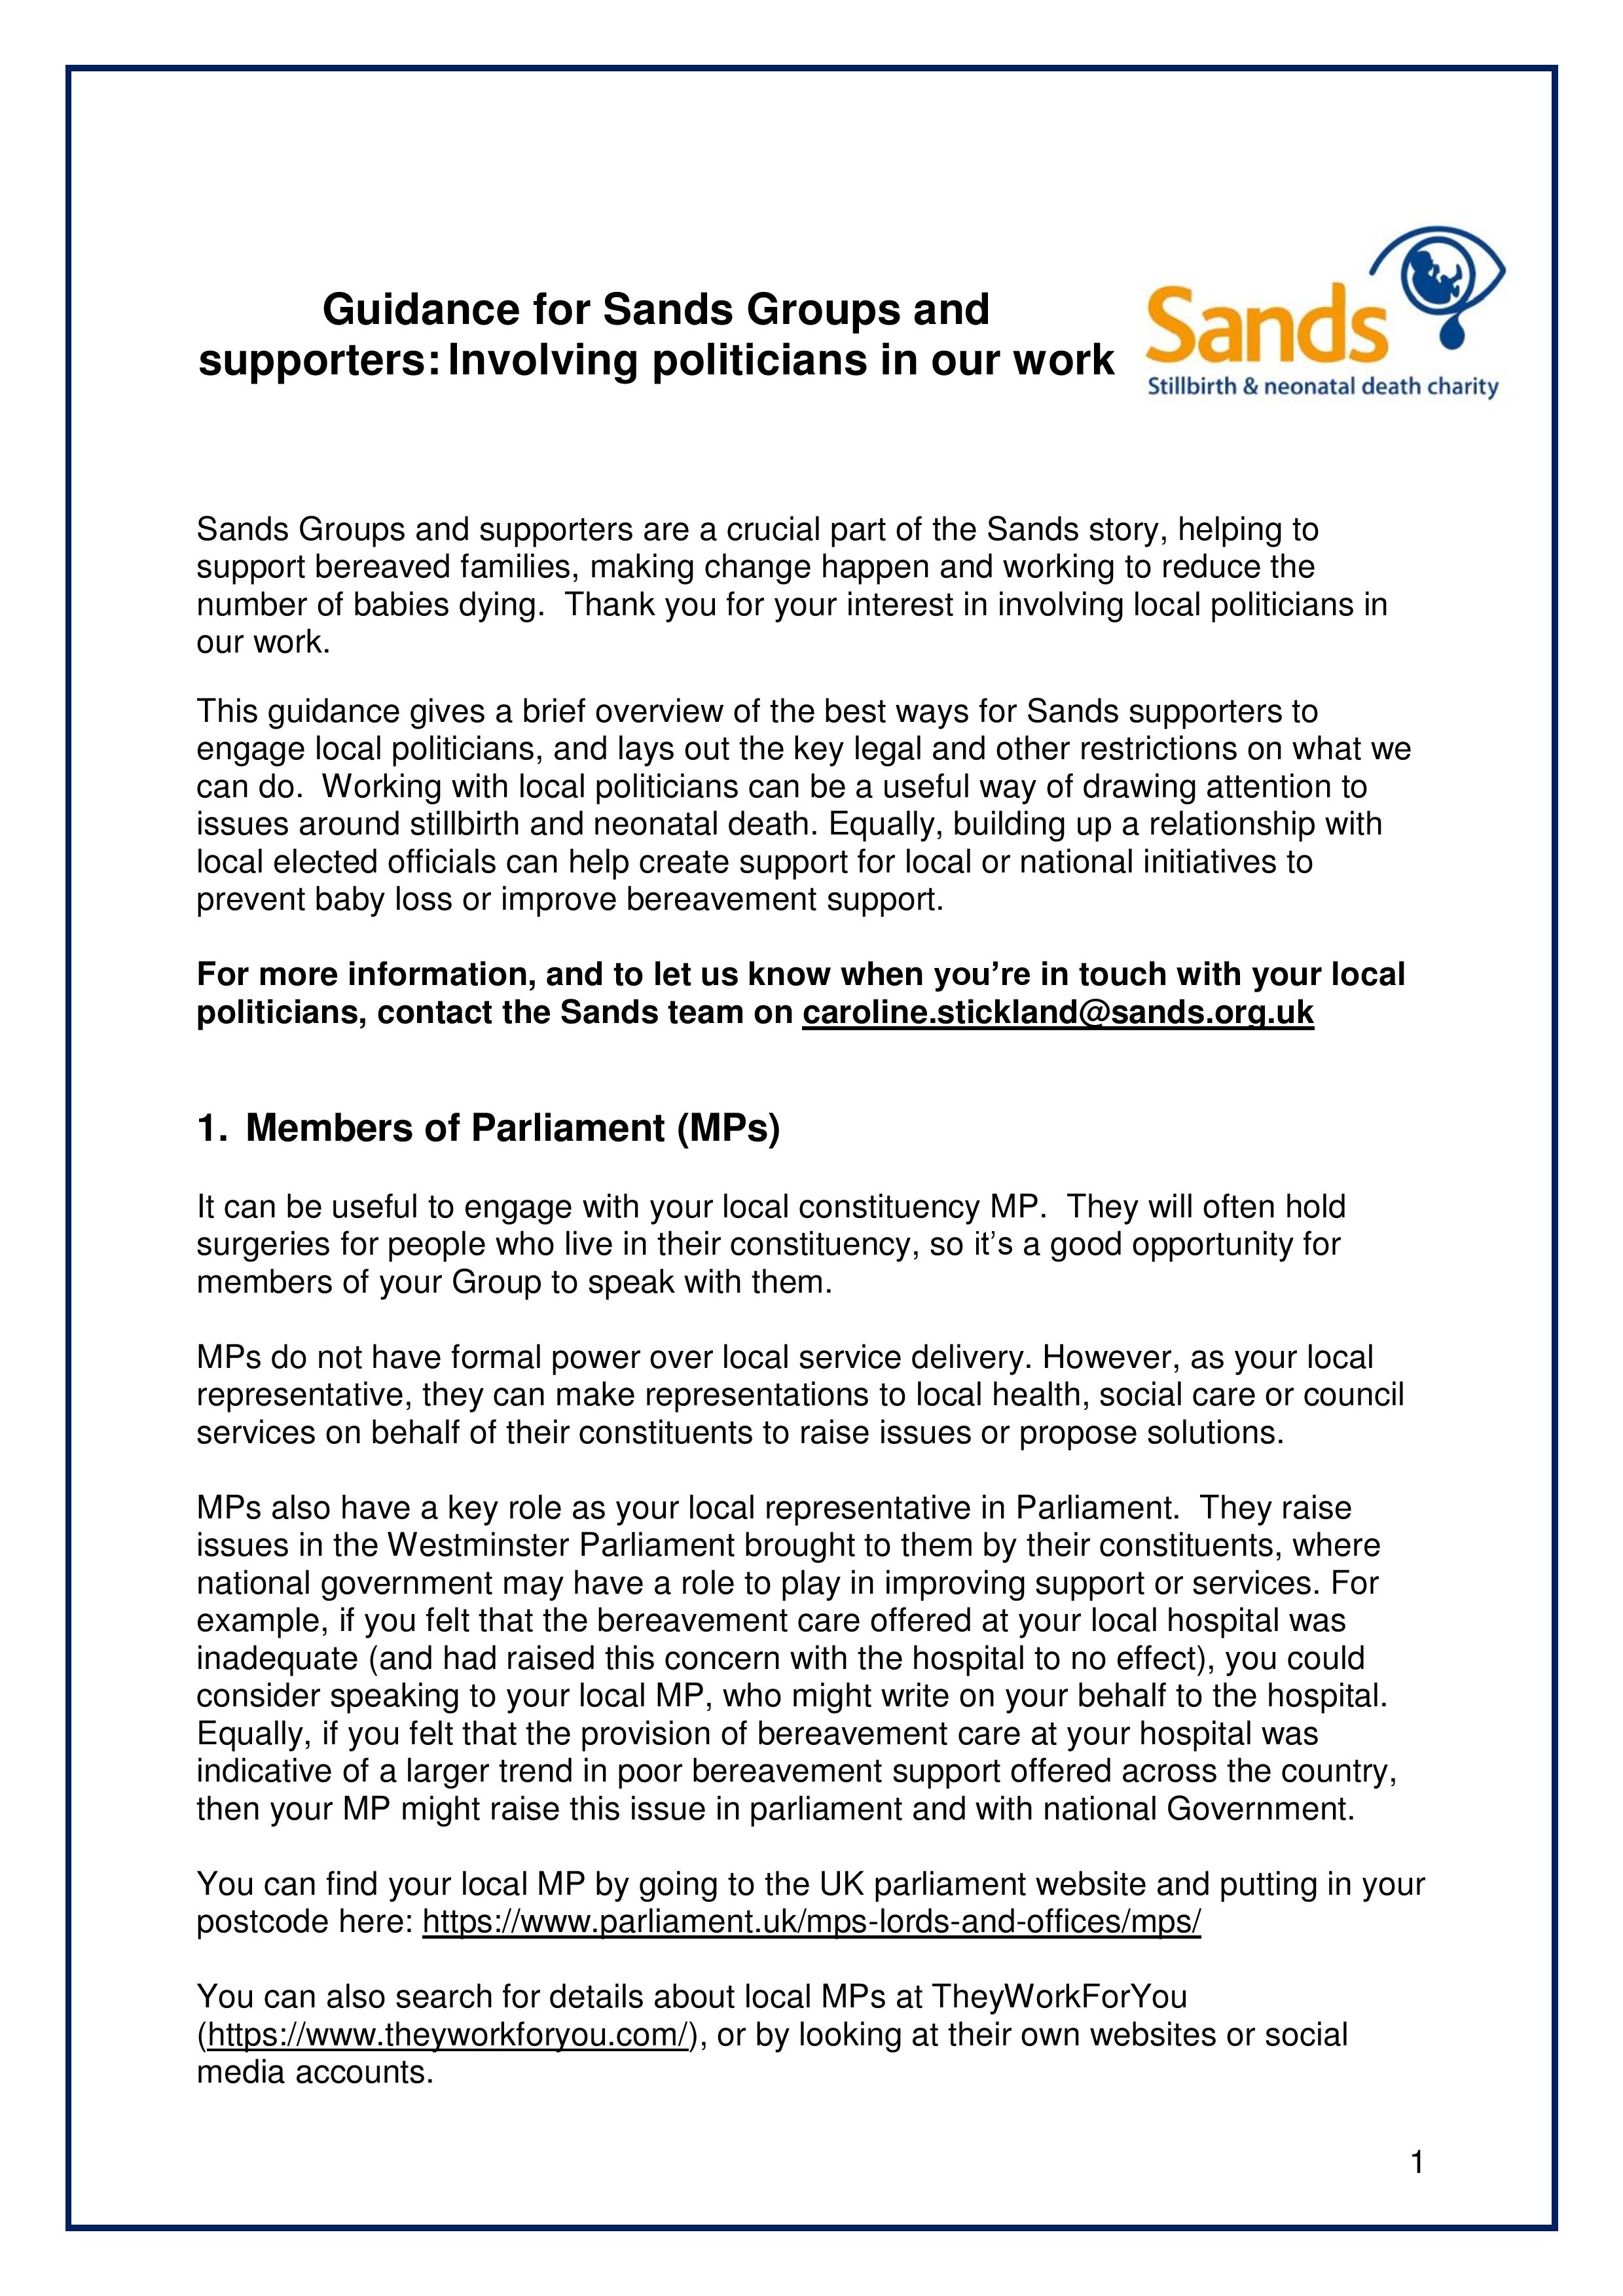 Guidance for Sands Groups and supporters: Involving politicians in our work